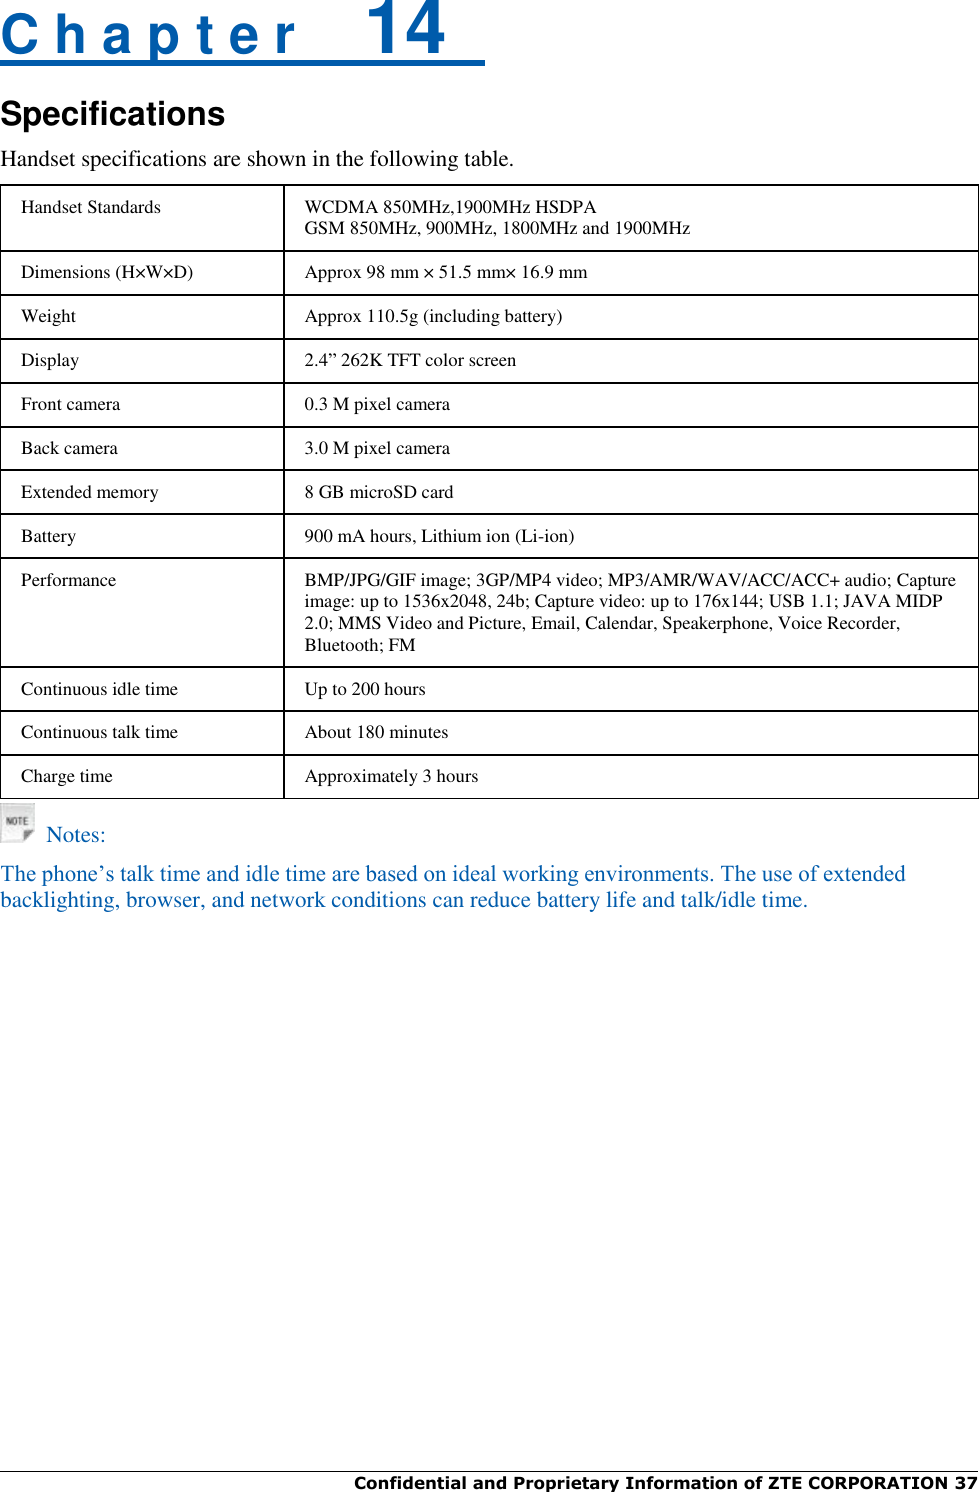 Confidential and Proprietary Information of ZTE CORPORATION 37   C h a p t e r    14   Specifications Handset specifications are shown in the following table. Handset Standards WCDMA 850MHz,1900MHz HSDPA GSM 850MHz, 900MHz, 1800MHz and 1900MHz Dimensions (H×W×D) Approx 98 mm × 51.5 mm× 16.9 mm Weight Approx 110.5g (including battery) Display 2.4” 262K TFT color screen Front camera 0.3 M pixel camera Back camera 3.0 M pixel camera Extended memory 8 GB microSD card Battery 900 mA hours, Lithium ion (Li-ion) Performance BMP/JPG/GIF image; 3GP/MP4 video; MP3/AMR/WAV/ACC/ACC+ audio; Capture image: up to 1536x2048, 24b; Capture video: up to 176x144; USB 1.1; JAVA MIDP 2.0; MMS Video and Picture, Email, Calendar, Speakerphone, Voice Recorder, Bluetooth; FM Continuous idle time Up to 200 hours Continuous talk time About 180 minutes Charge time Approximately 3 hours    Notes: The phone‟s talk time and idle time are based on ideal working environments. The use of extended backlighting, browser, and network conditions can reduce battery life and talk/idle time. 